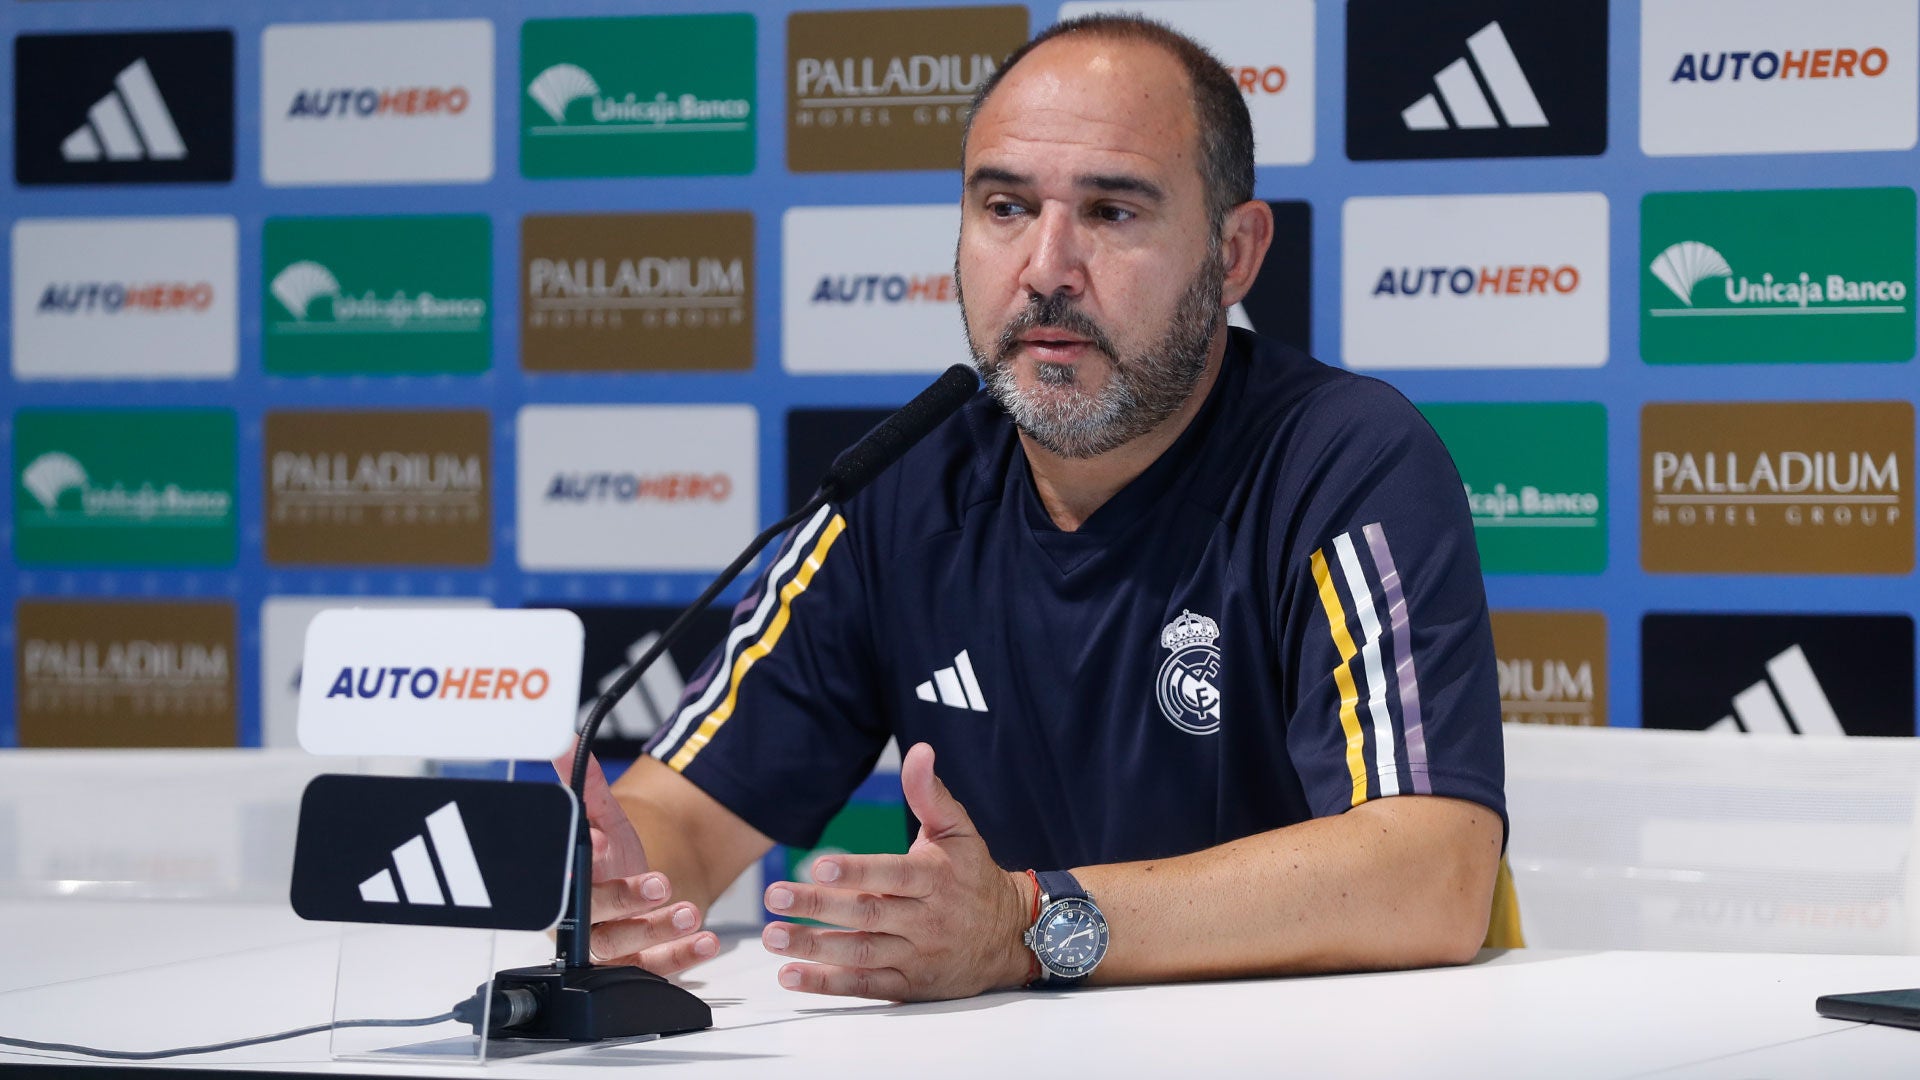 Chus Mateo: “We want to finish as high as possible and clinch home-court advantage"